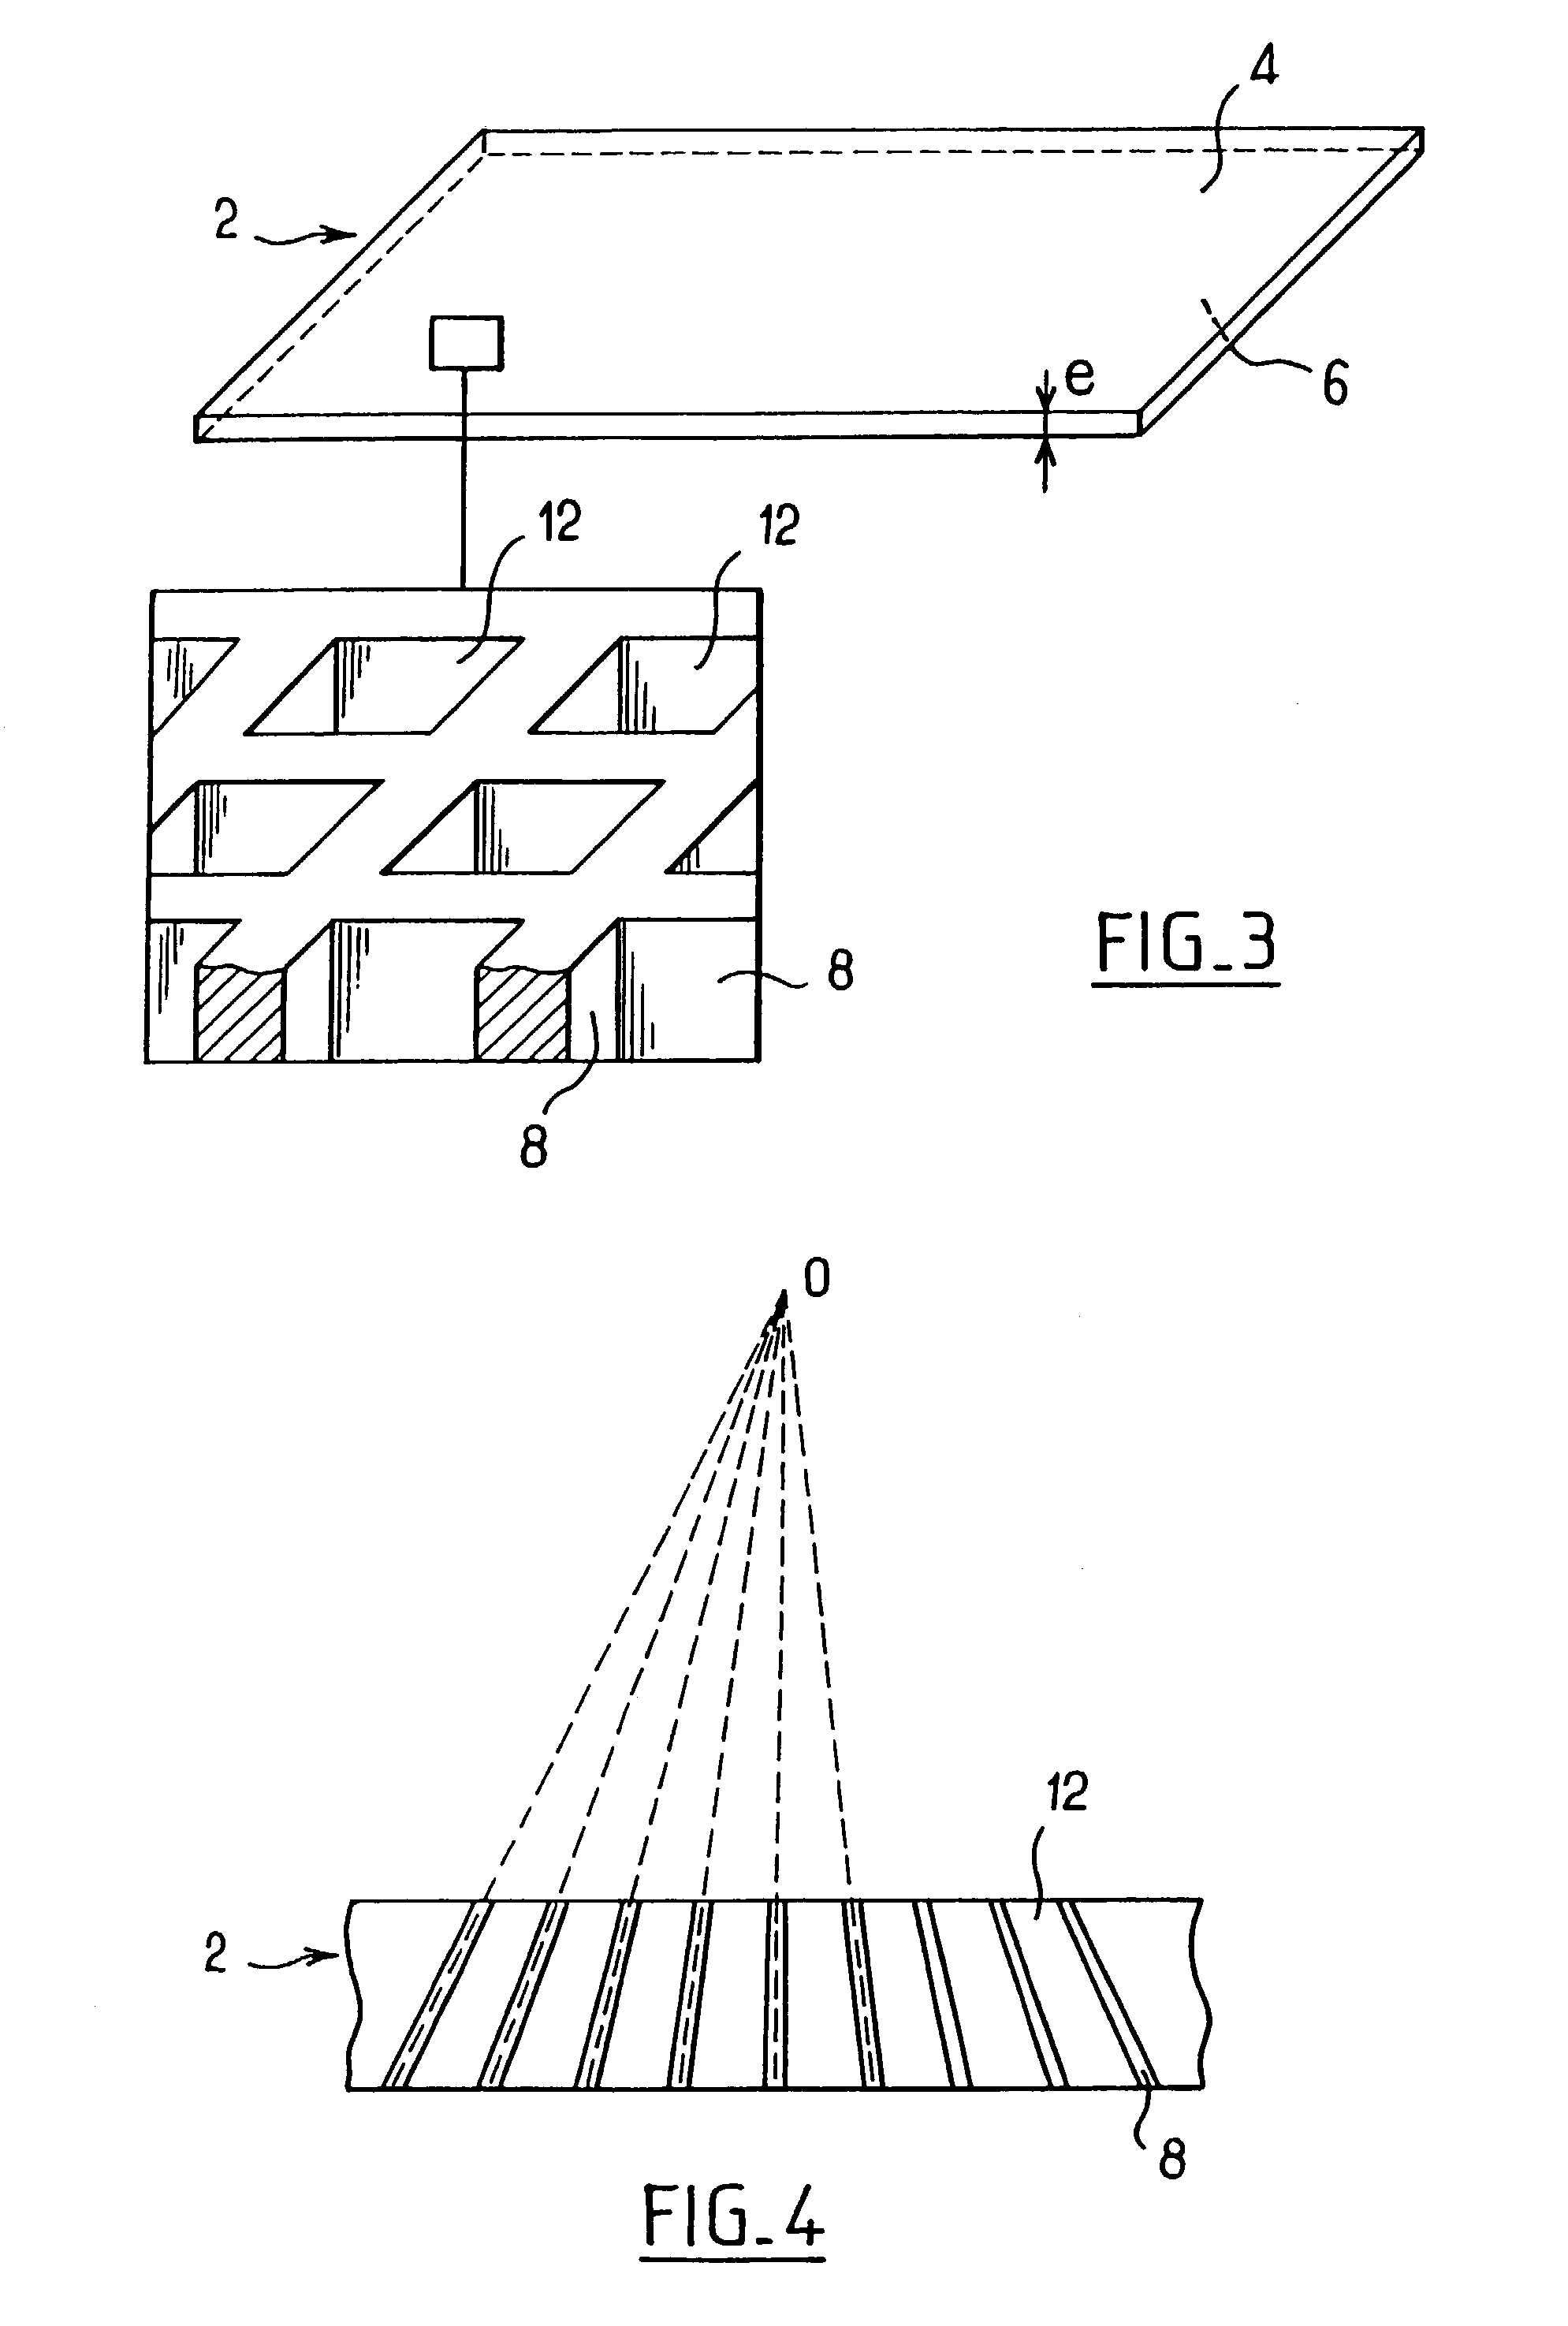 Antiscattering grid and a method of manufacturing such a grid